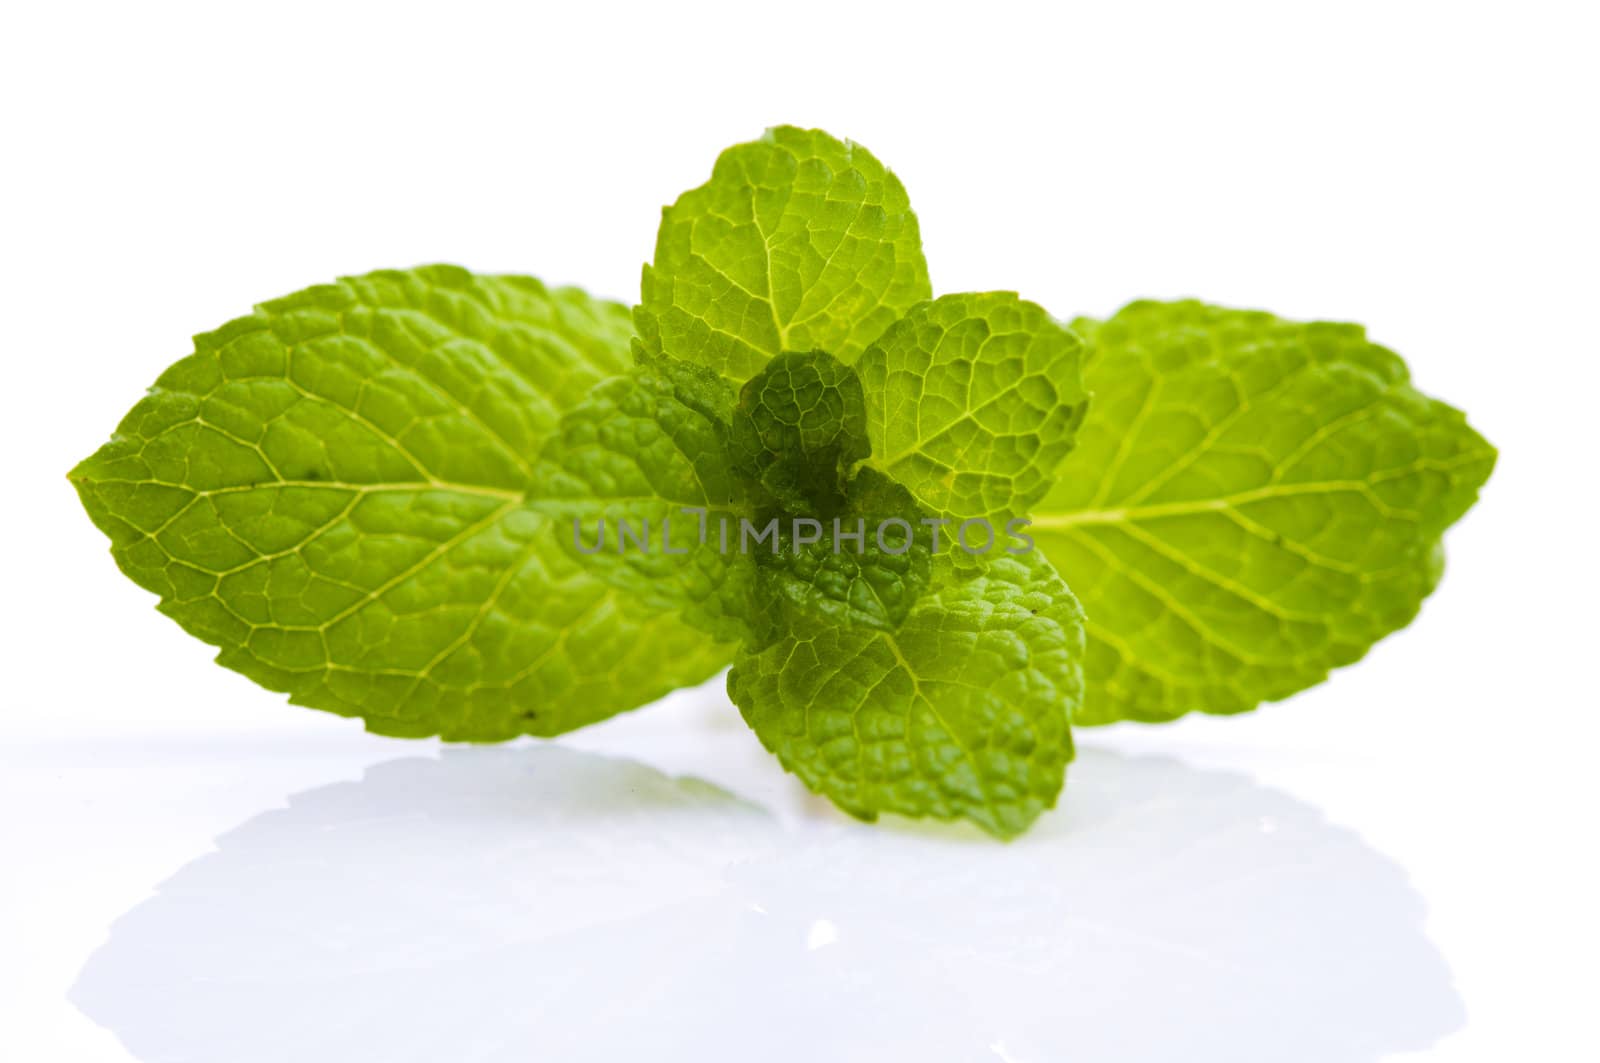 Green Mint on white background  by yuliang11